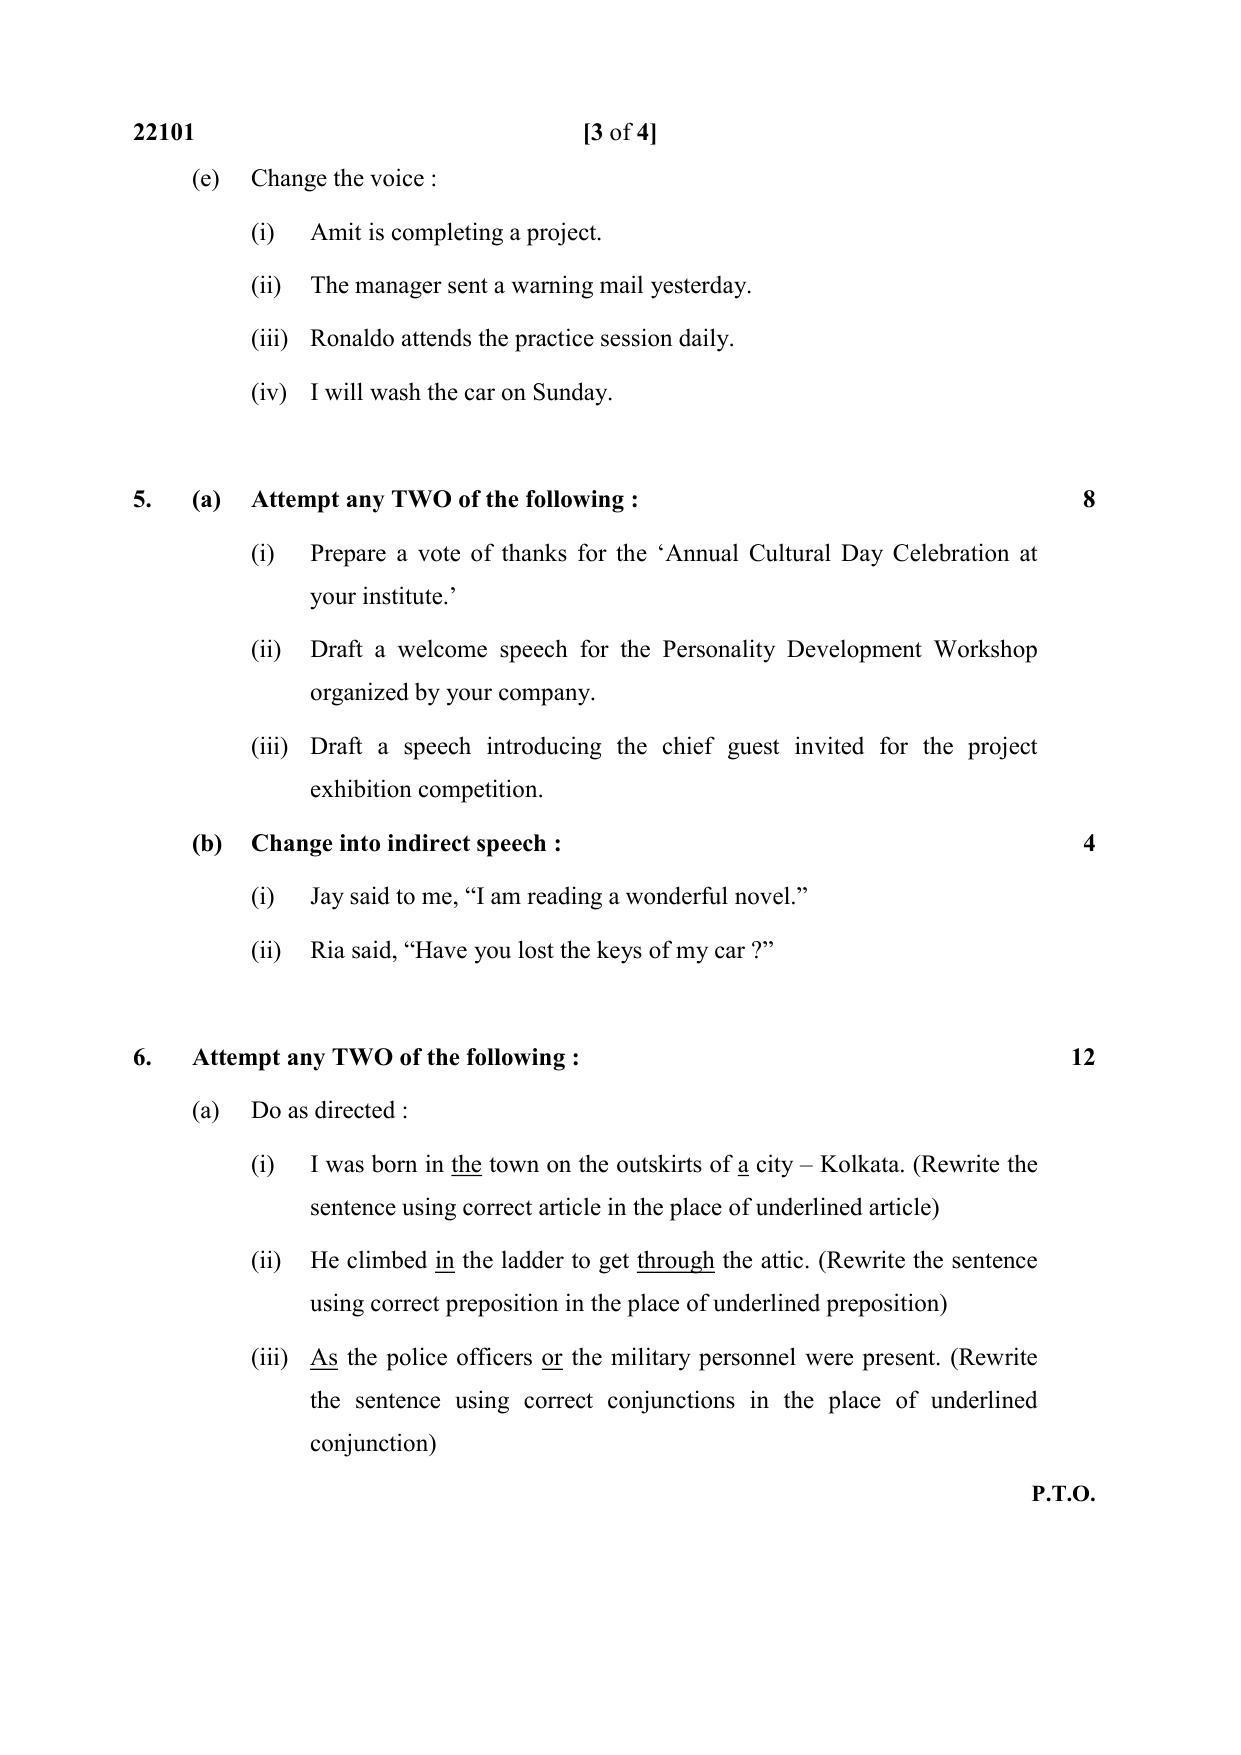 MSBTE Question Paper - 2019 - English - Page 3